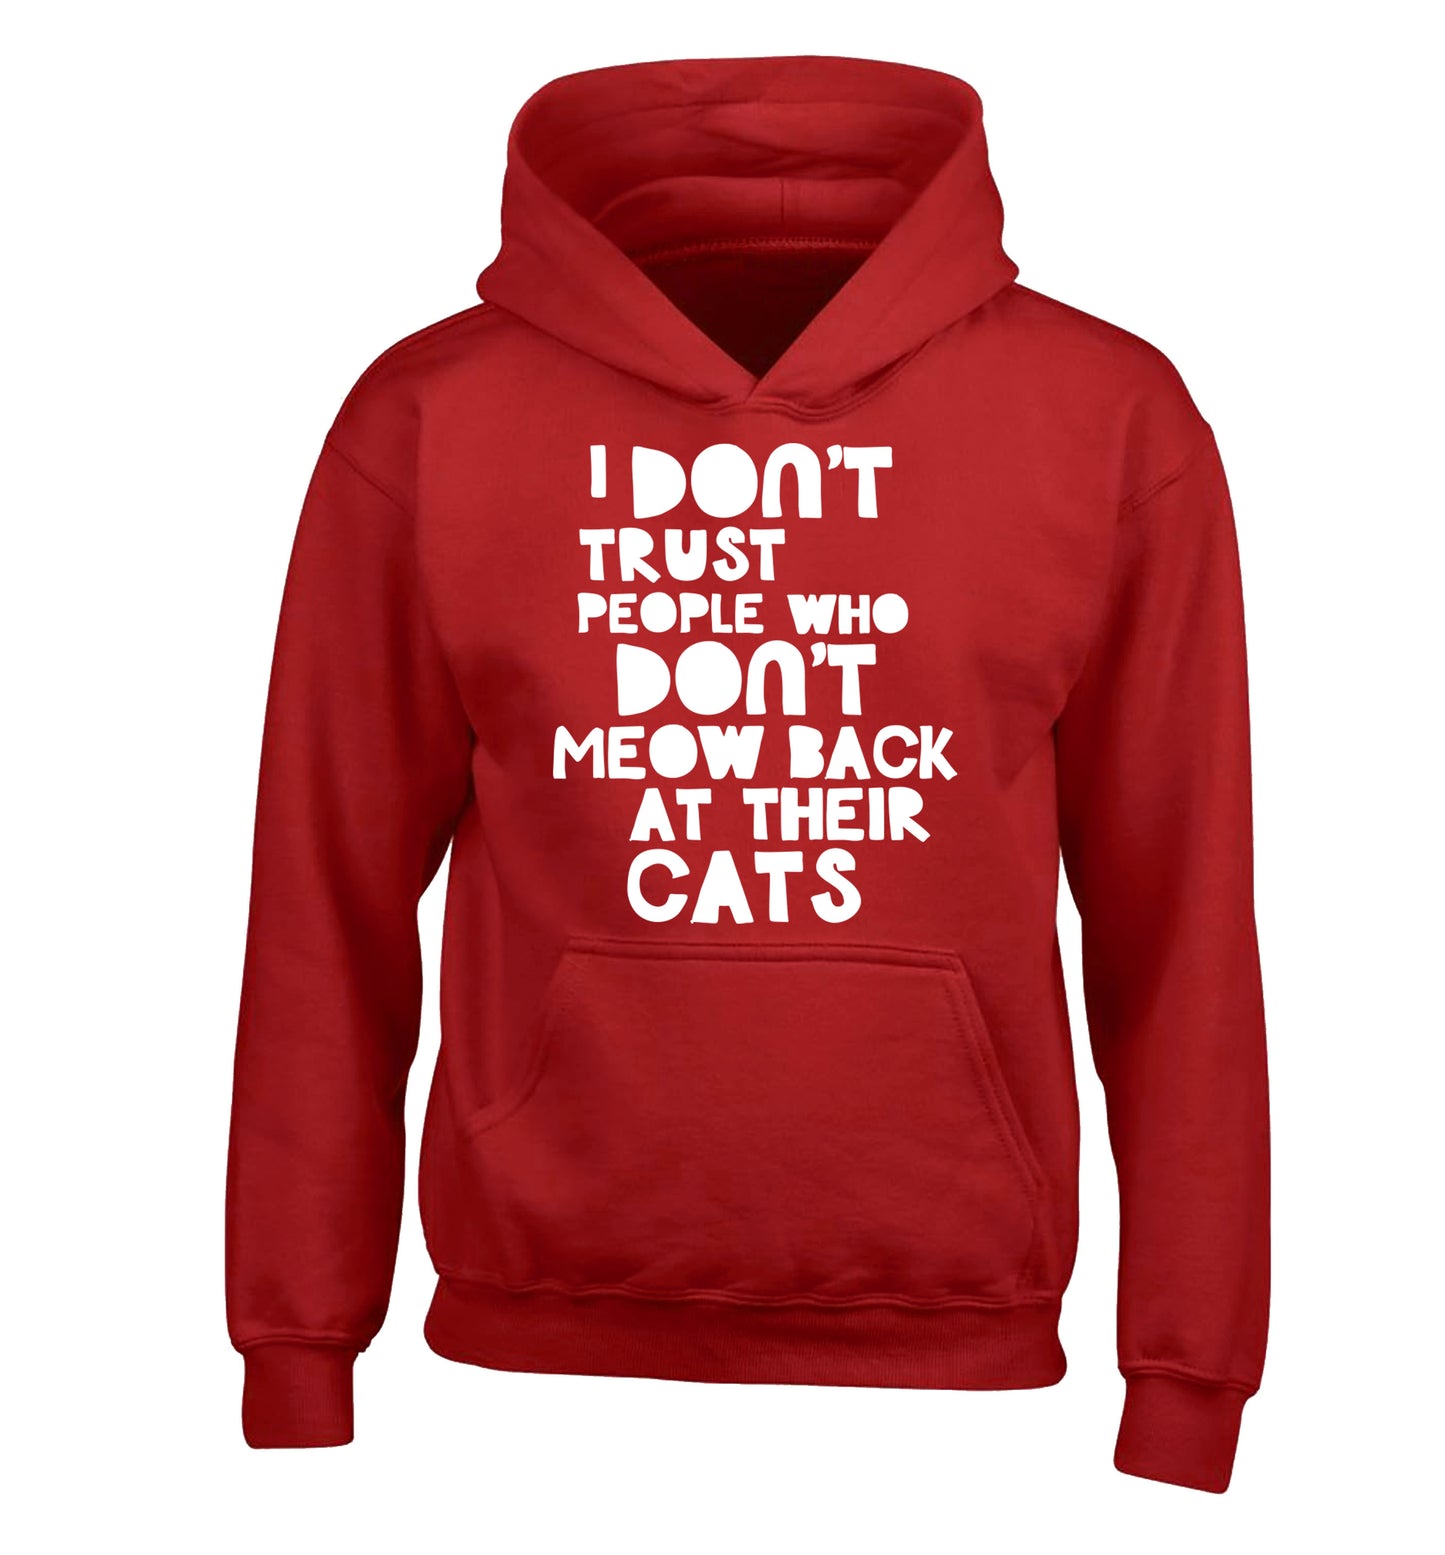 I don't trust people who don't meow back at their cats children's red hoodie 12-13 Years